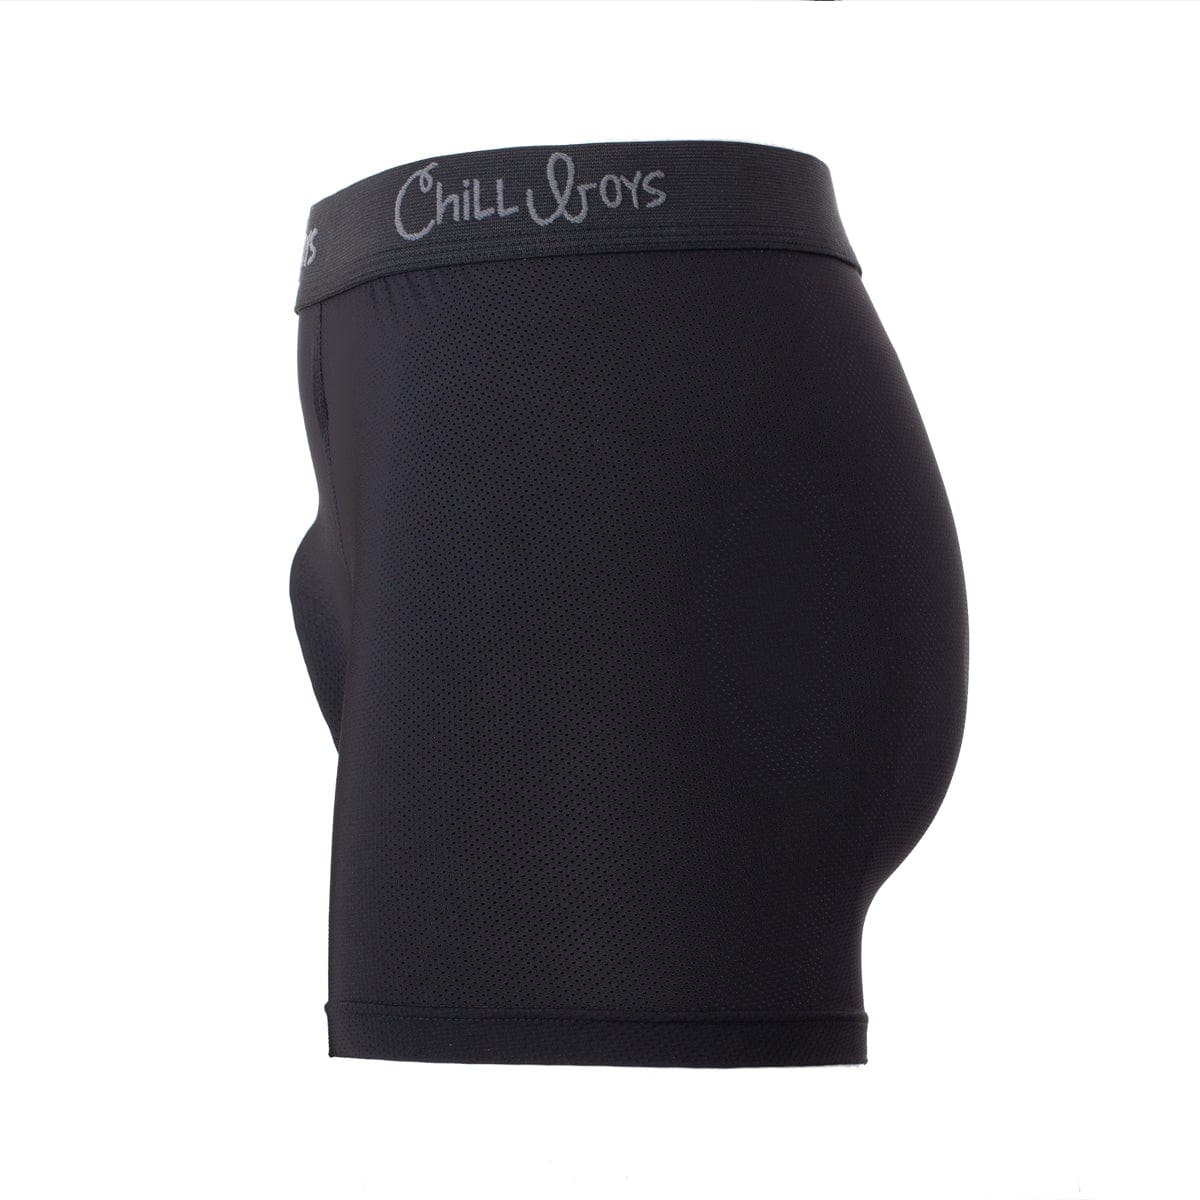 Onyx Black - Chill Boys Soft Stretch, Quick-Dry Trunks - side view